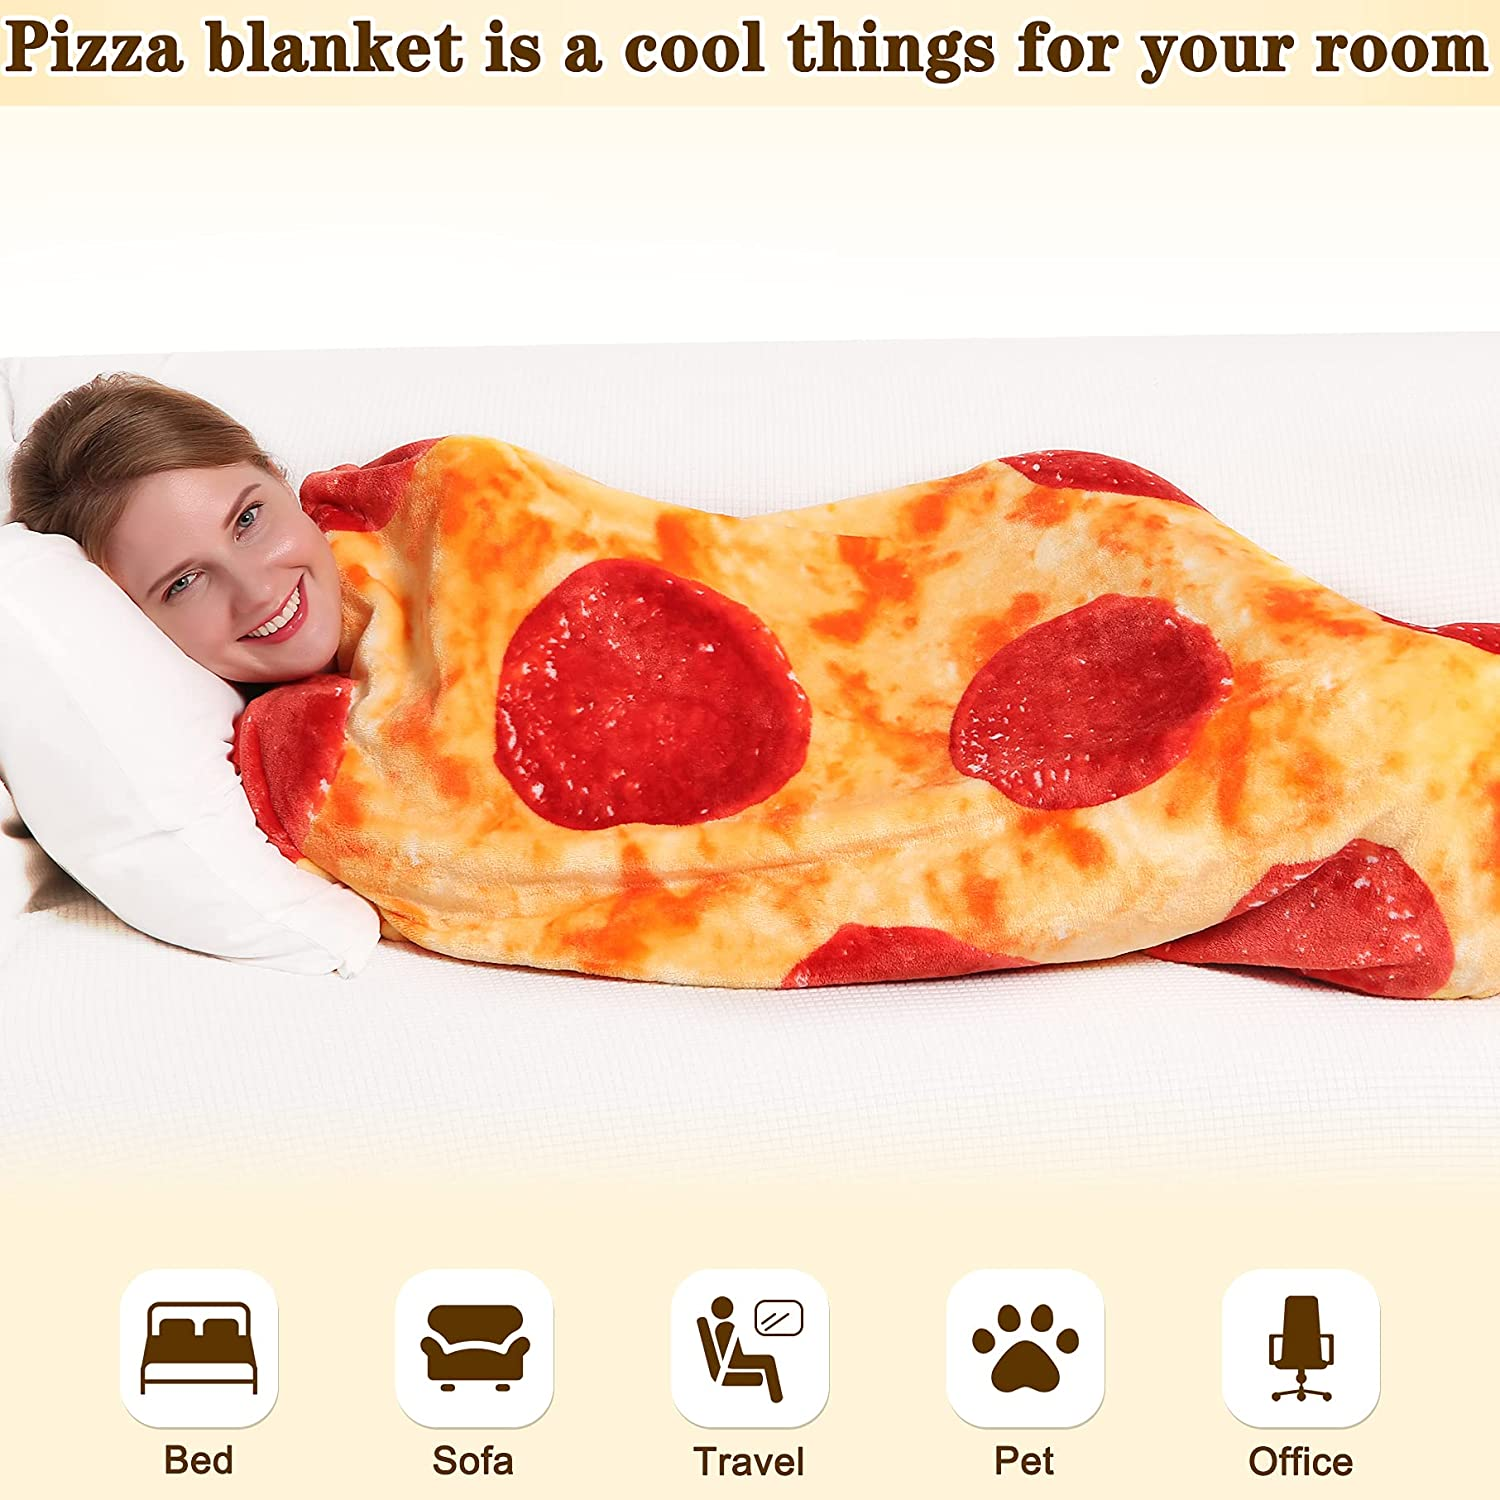 Mermaker Pepperoni Pizza Blanket 2.0 Double Sided 71 Inch for Adult and Kids, Pizza Blanket Adult Size, Realistic Food Blanket, 285 GSM Soft Pizza Blanket, Funny Gifts for Teenage Boys and Girls